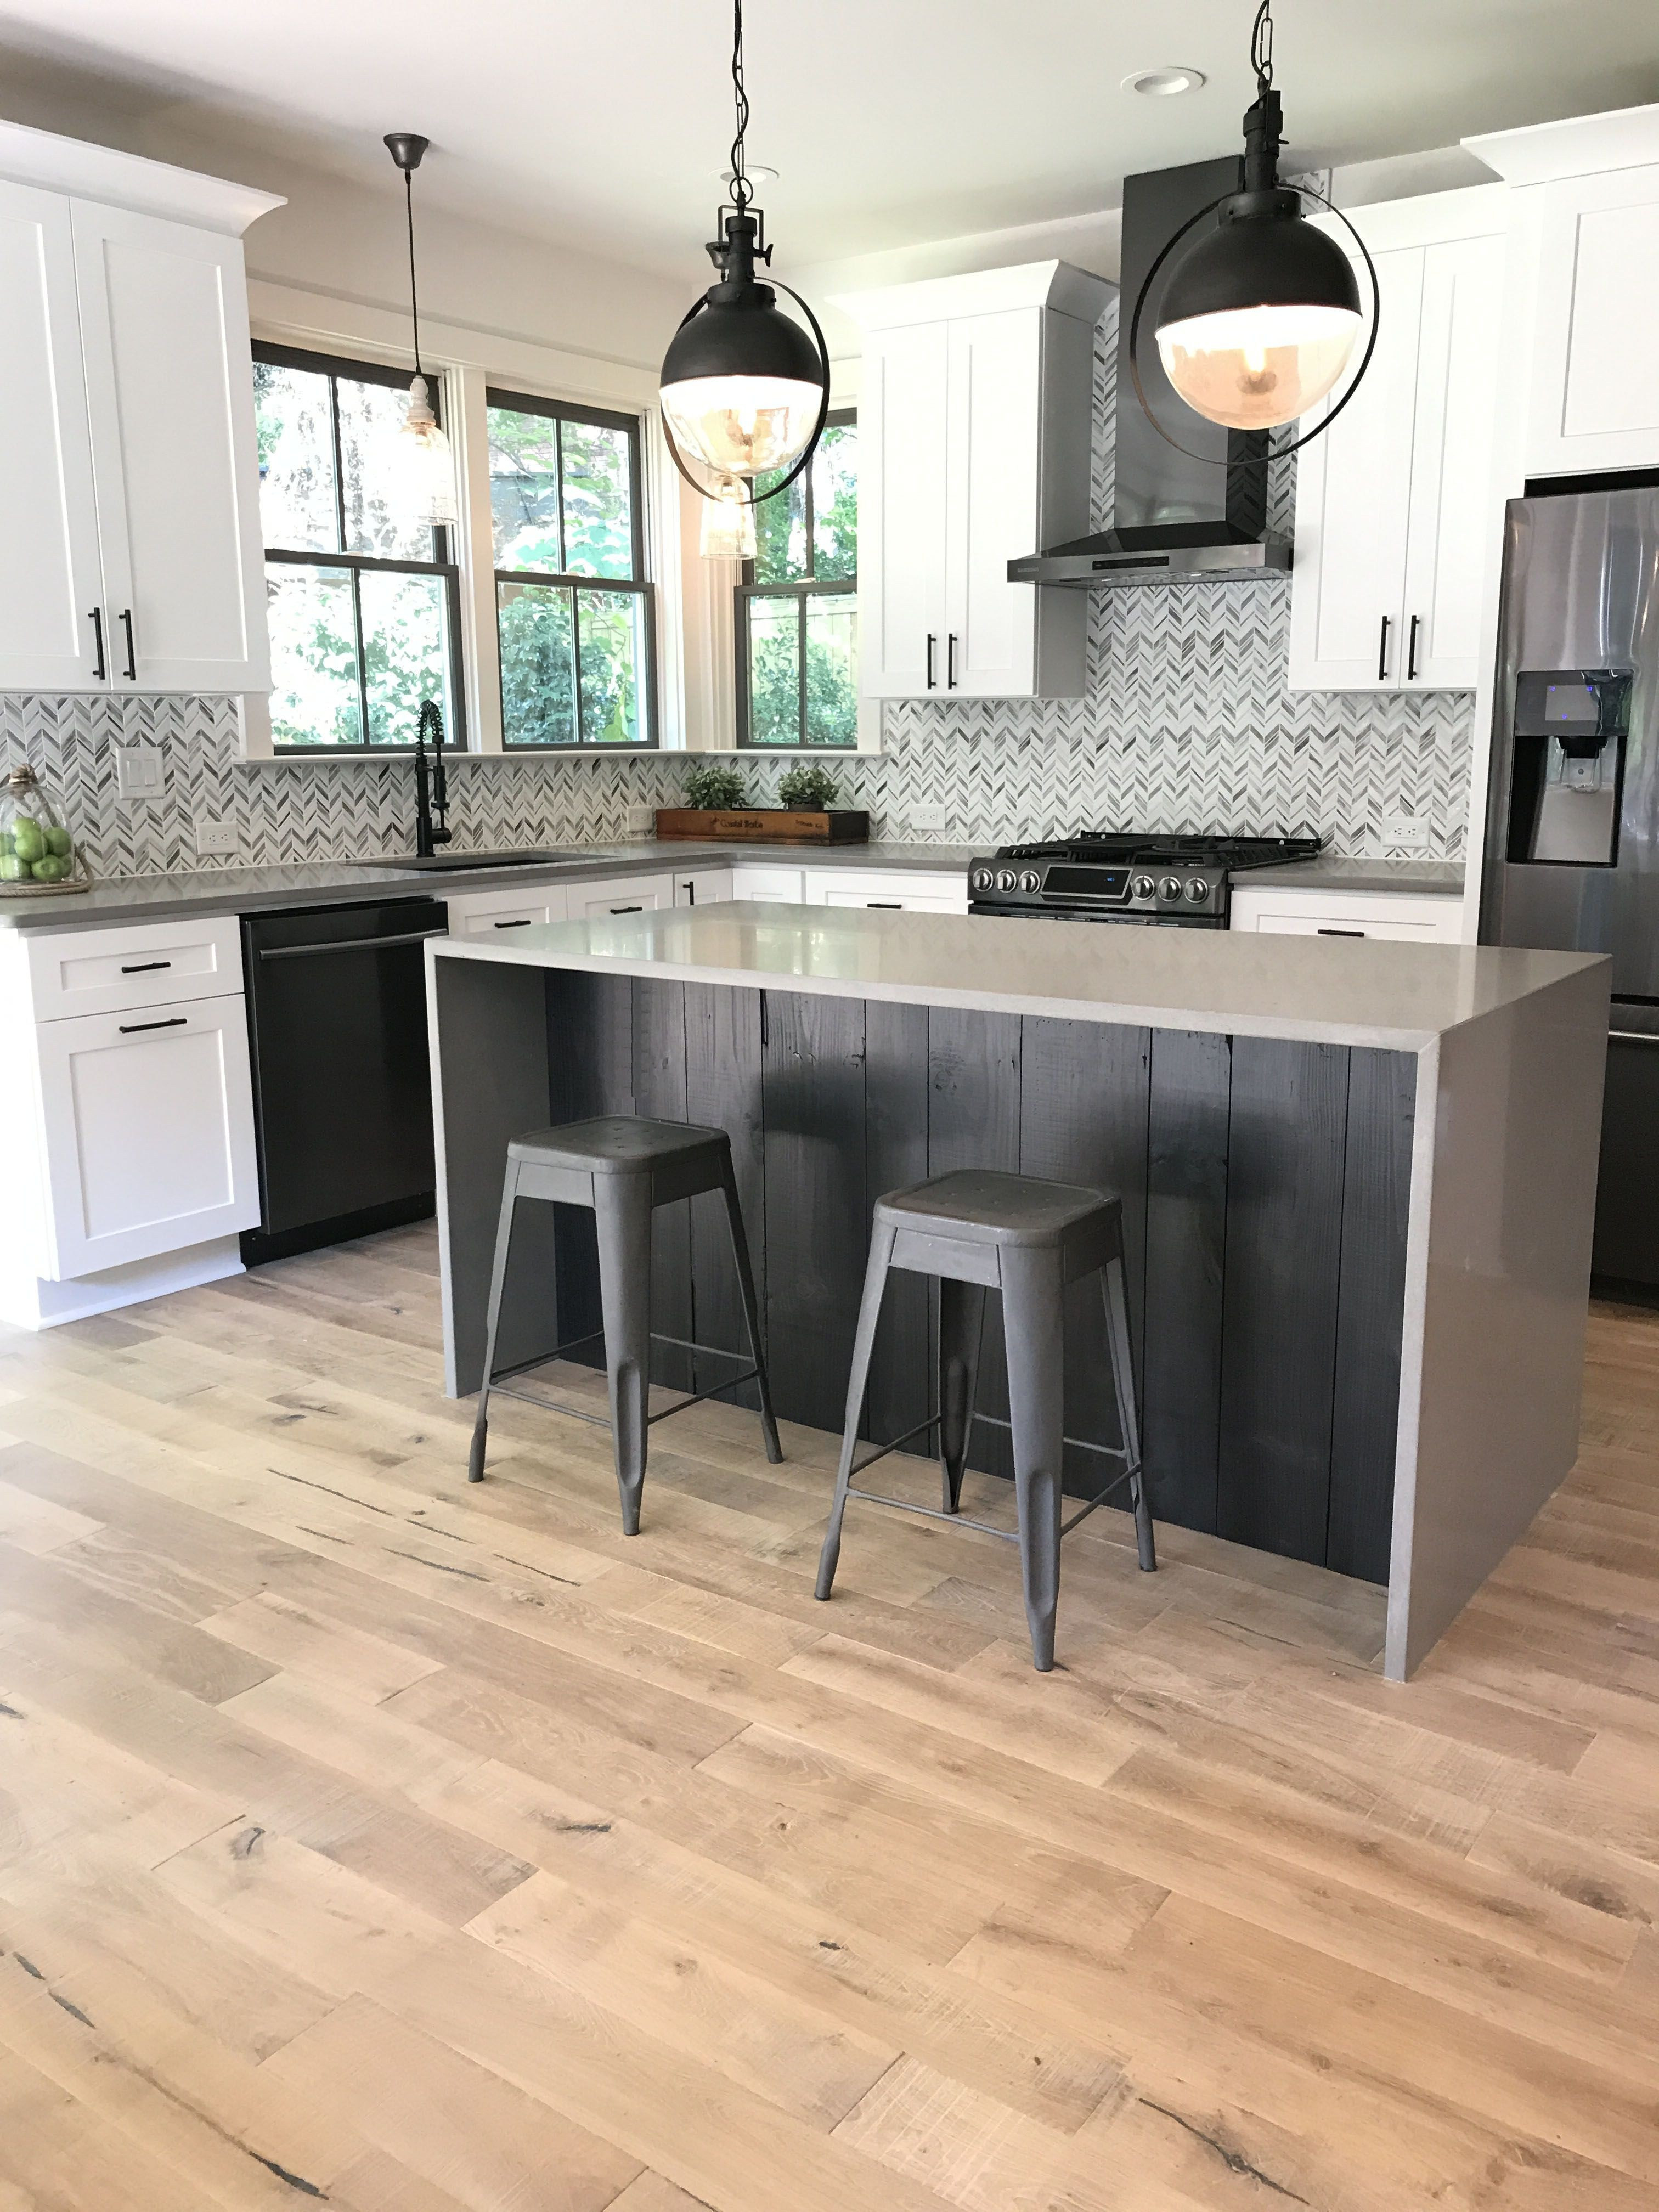 29 Nice How to Protect Hardwood Floors In Kitchen 2024 free download how to protect hardwood floors in kitchen of ultimate flooring new engineered vinyl plank flooring called for ultimate flooring 30 luxury hardwood floors in kitchen griffindesignkitchens